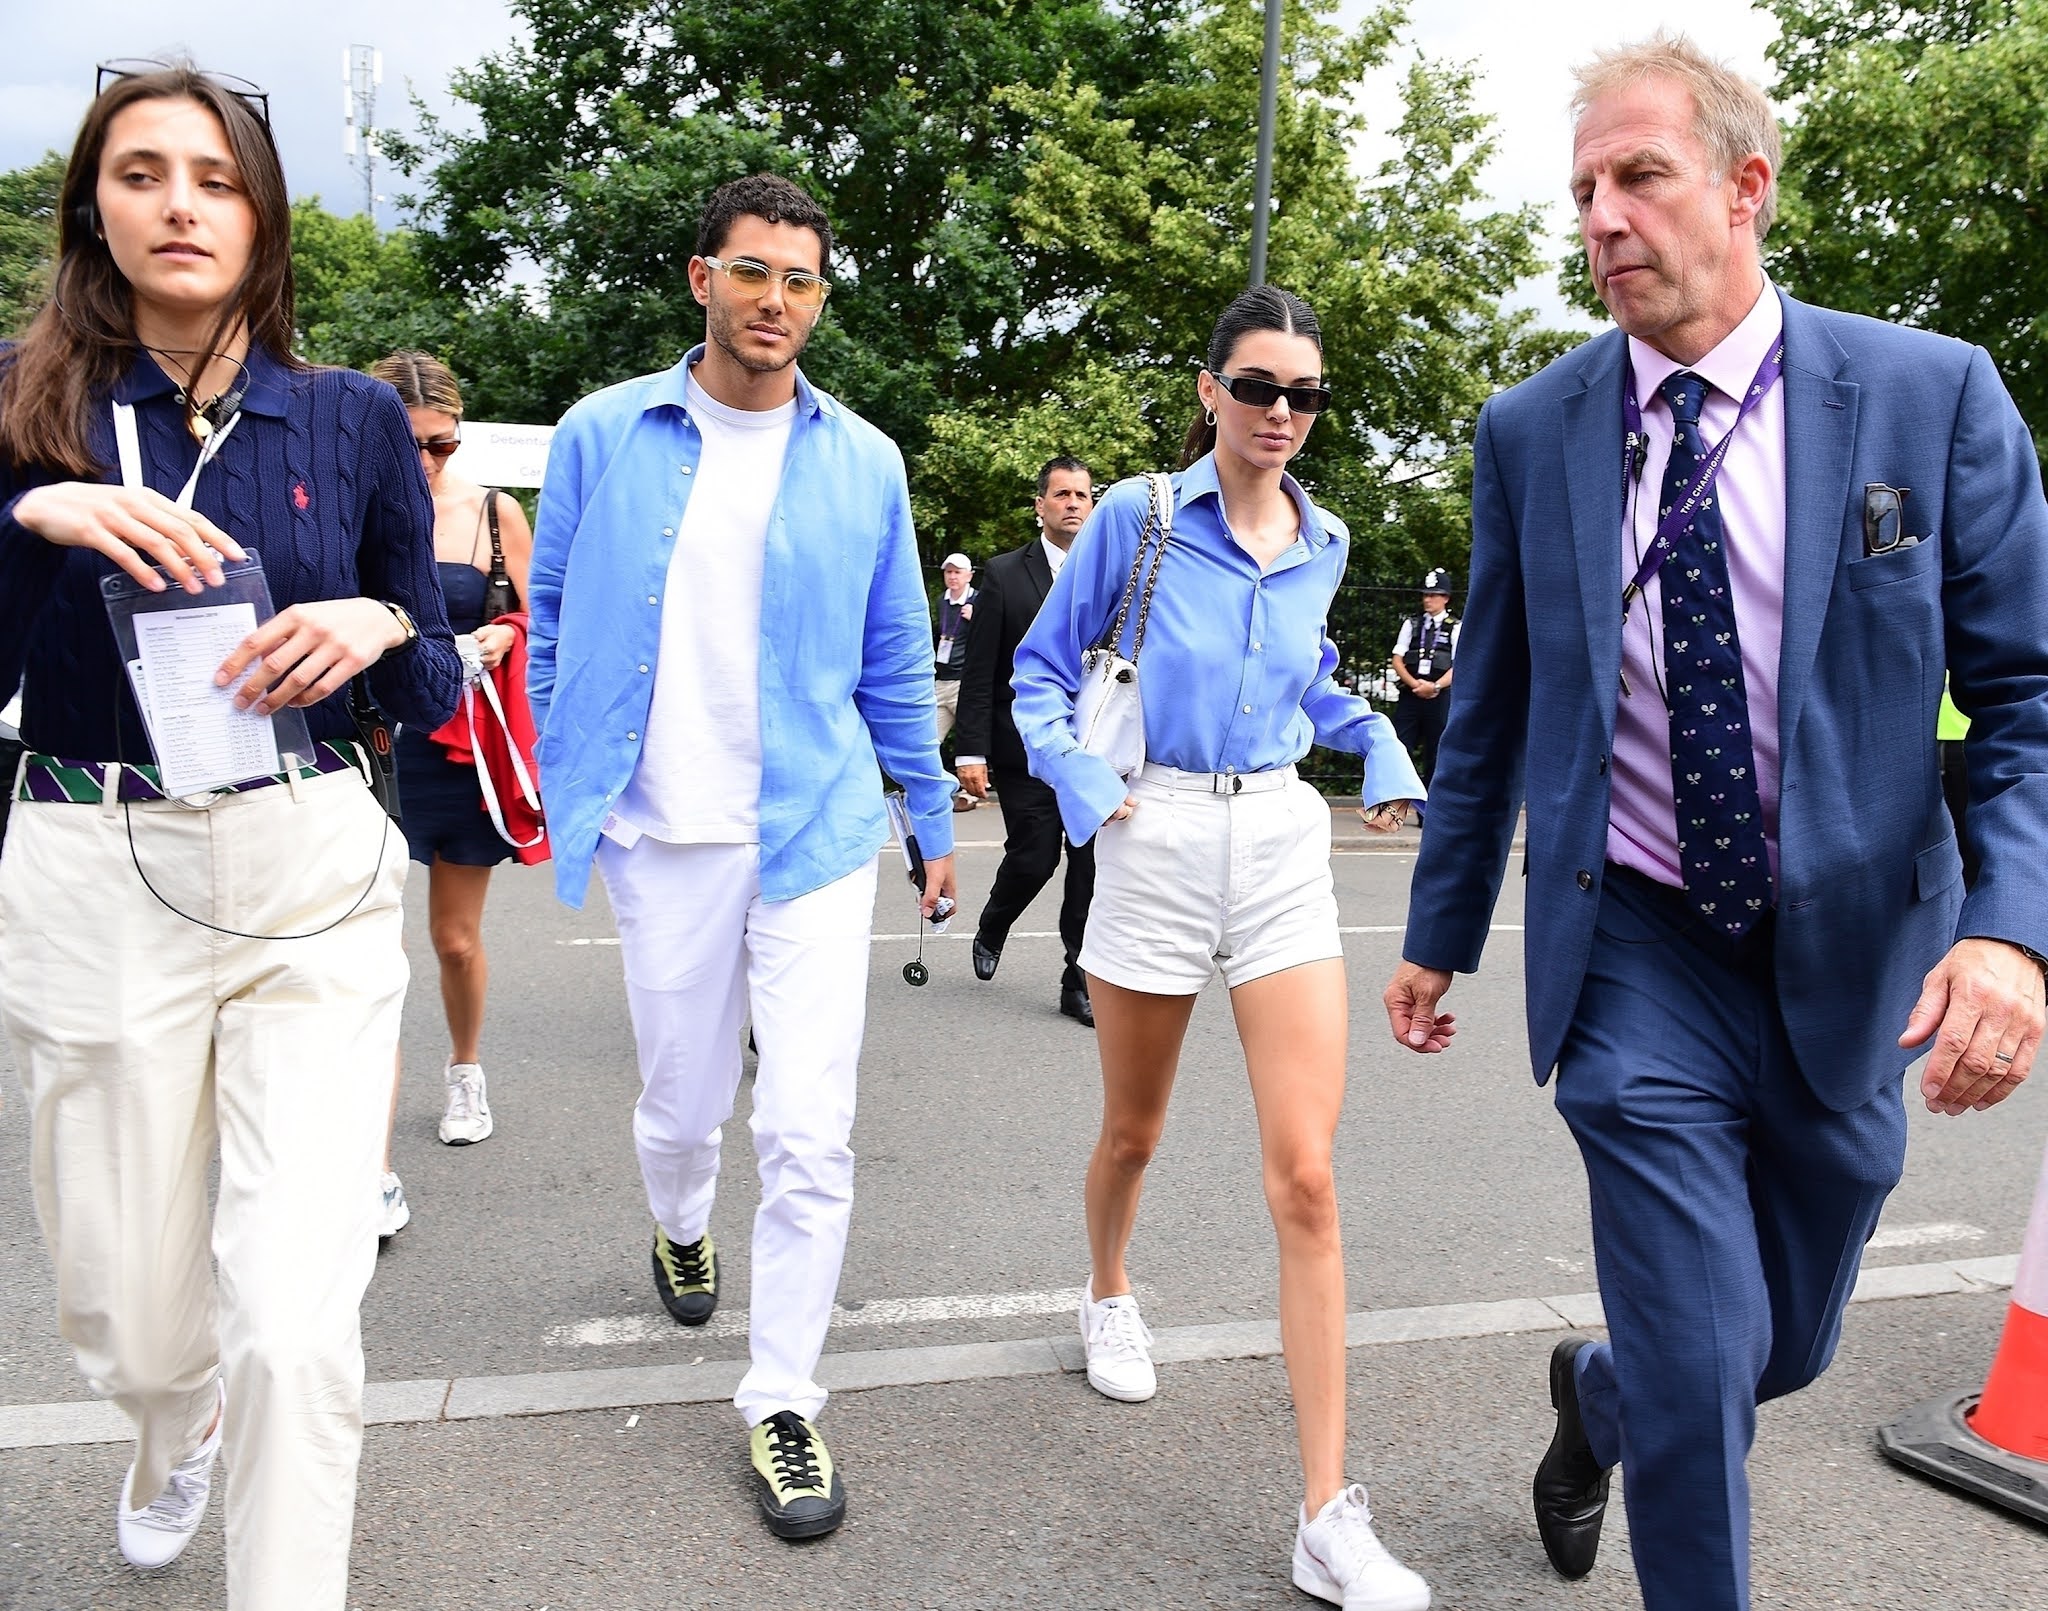 Jul 14th 2019 Arriving For The 2019 Wimbledon Championships Final At ...